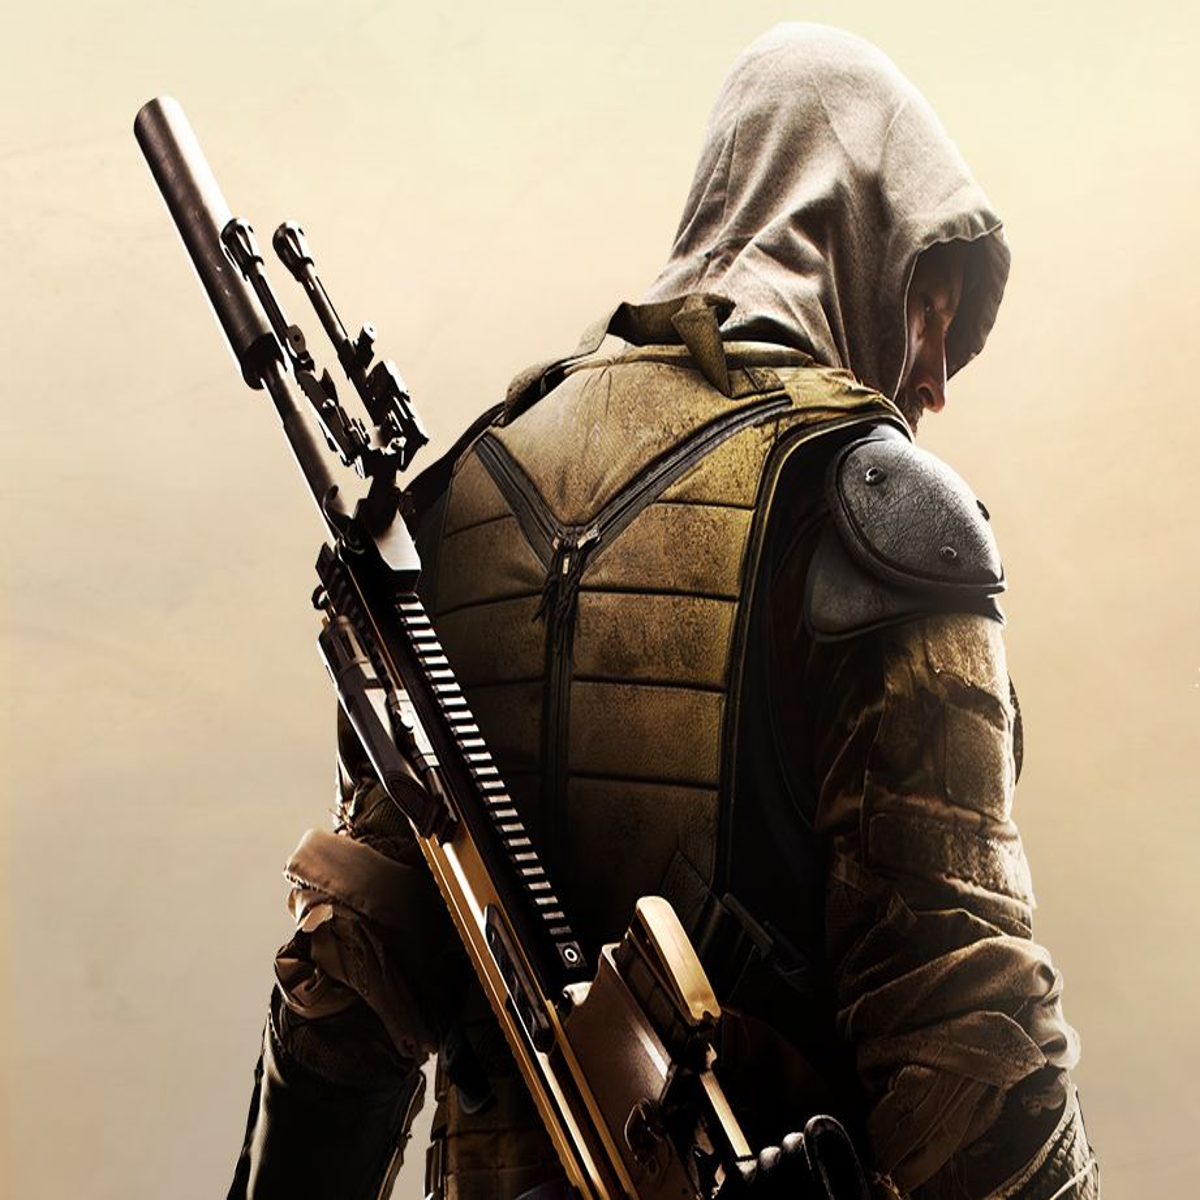 https://assetsio.reedpopcdn.com/sniper_ghost_warrior_contracts_2_main_art.jpg?width=1200&height=1200&fit=crop&quality=100&format=png&enable=upscale&auto=webp